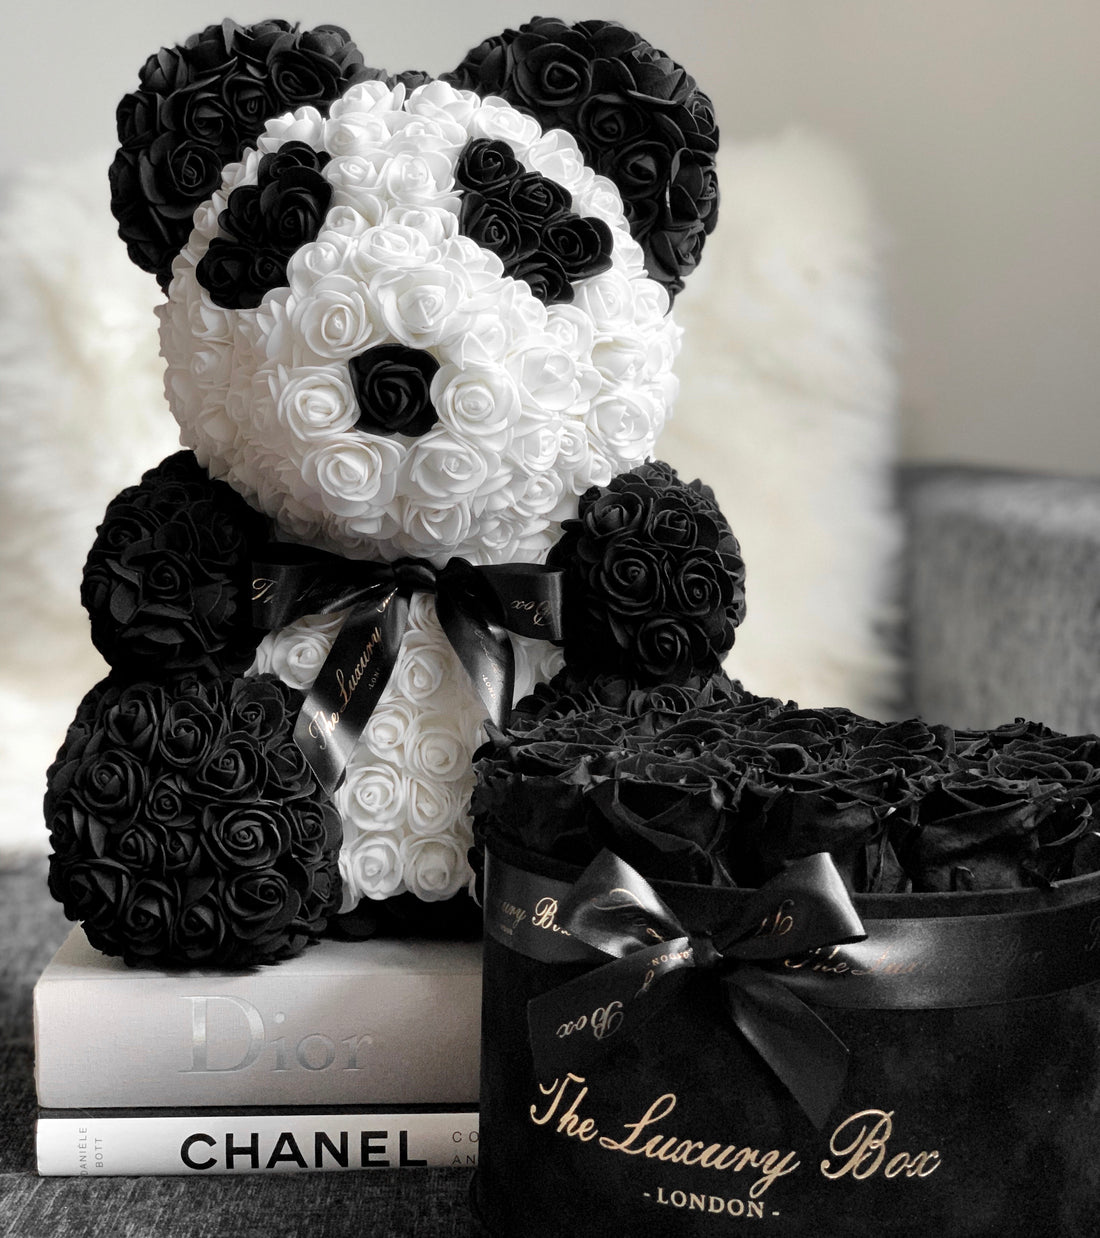 Panda Rose bear and infinity roses box set luxury gift for birthdays, wedding anniversary, new baby gift and special occasions